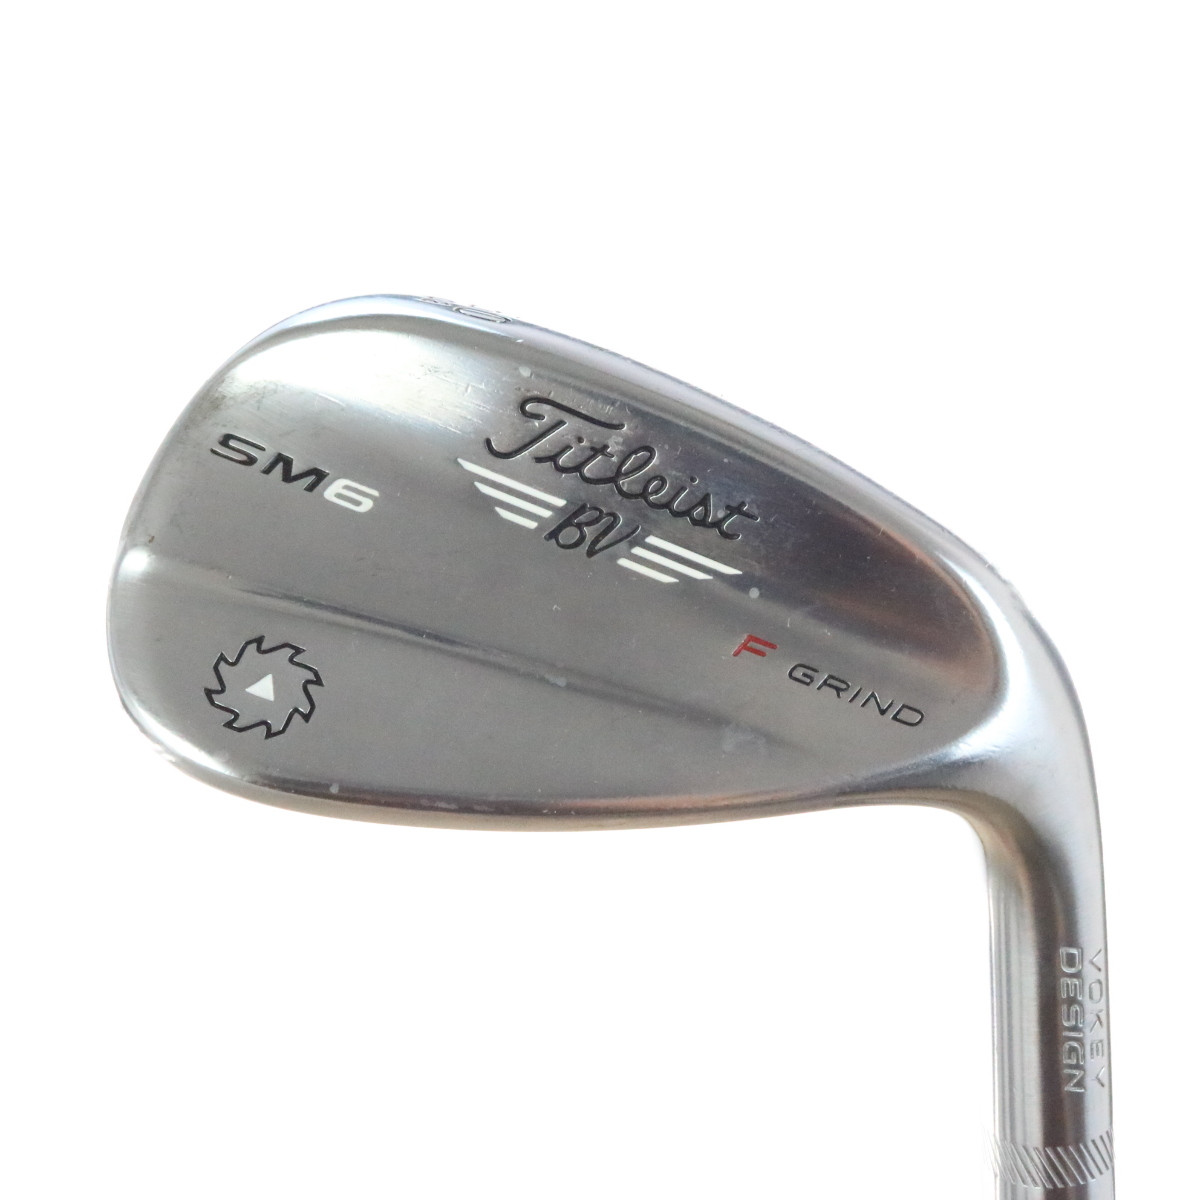 54 or 56 degree wedge